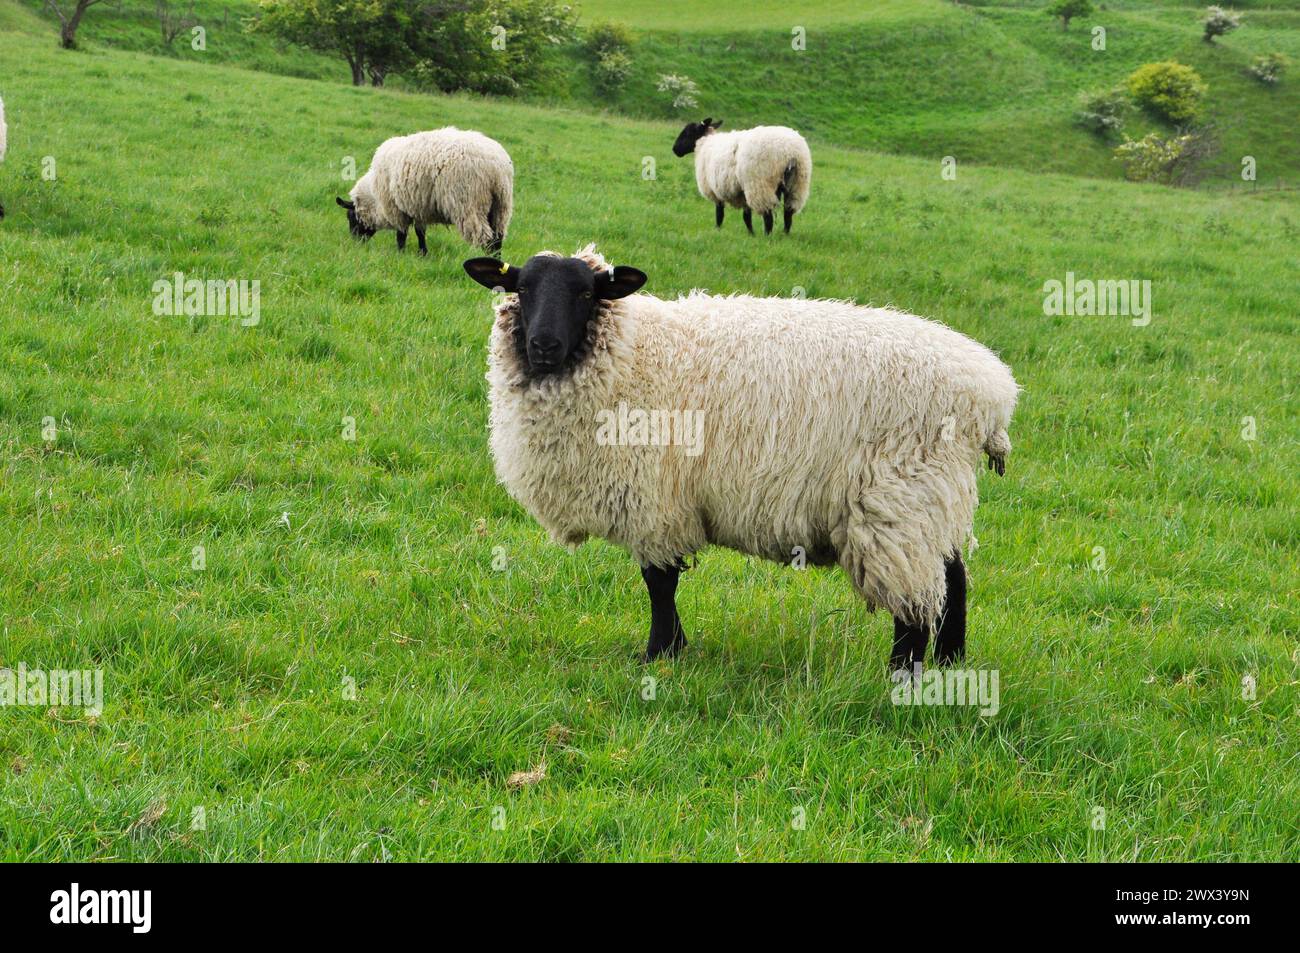 Black faced sheep grazing on the slopes of the Iron Age hillfort defences at Bratton in Wiltshire.UK Stock Photo